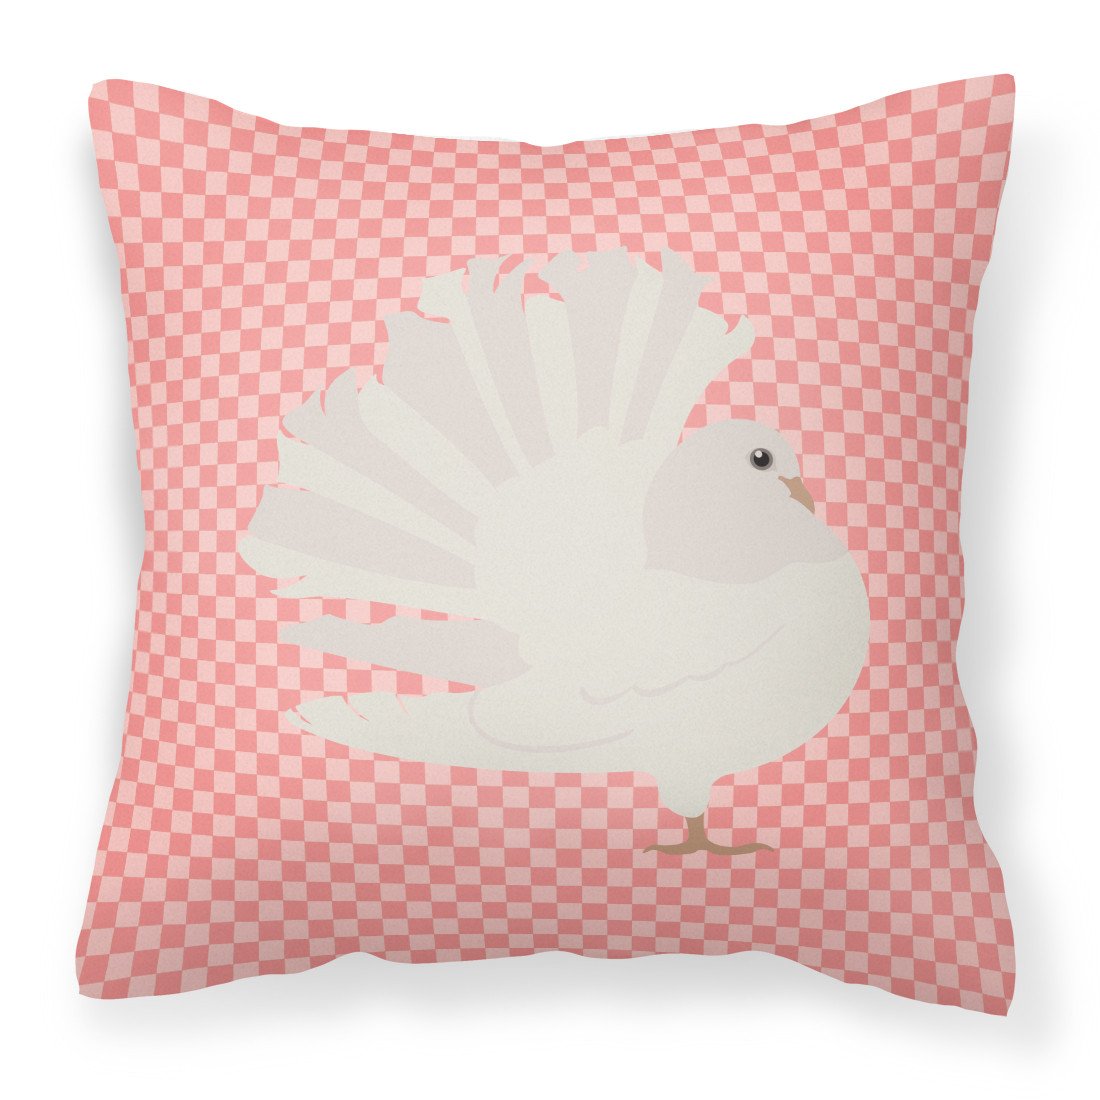 Silver Fantail Pigeon Pink Check Fabric Decorative Pillow BB7950PW1818 by Caroline's Treasures